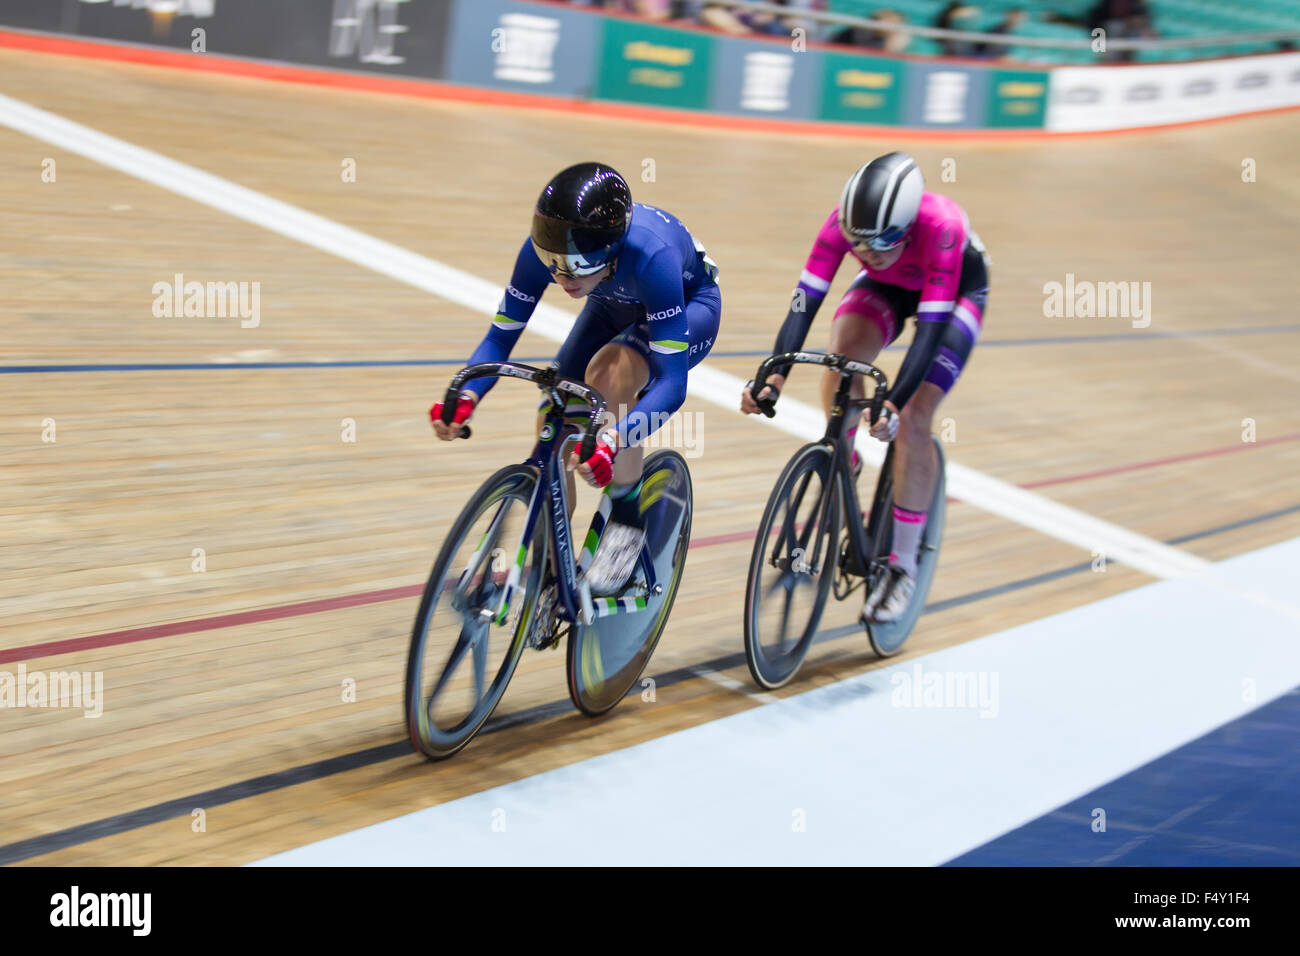 Manchester, UK. 24th Oct, 2015. Champion cyclist Laura Trott (blue) wins again in the Revolution 53 cycling competition at the National Cycling Centre. Second place goes to Katie Archibald (pink). Credit:  Michael Buddle/Alamy Live News Stock Photo